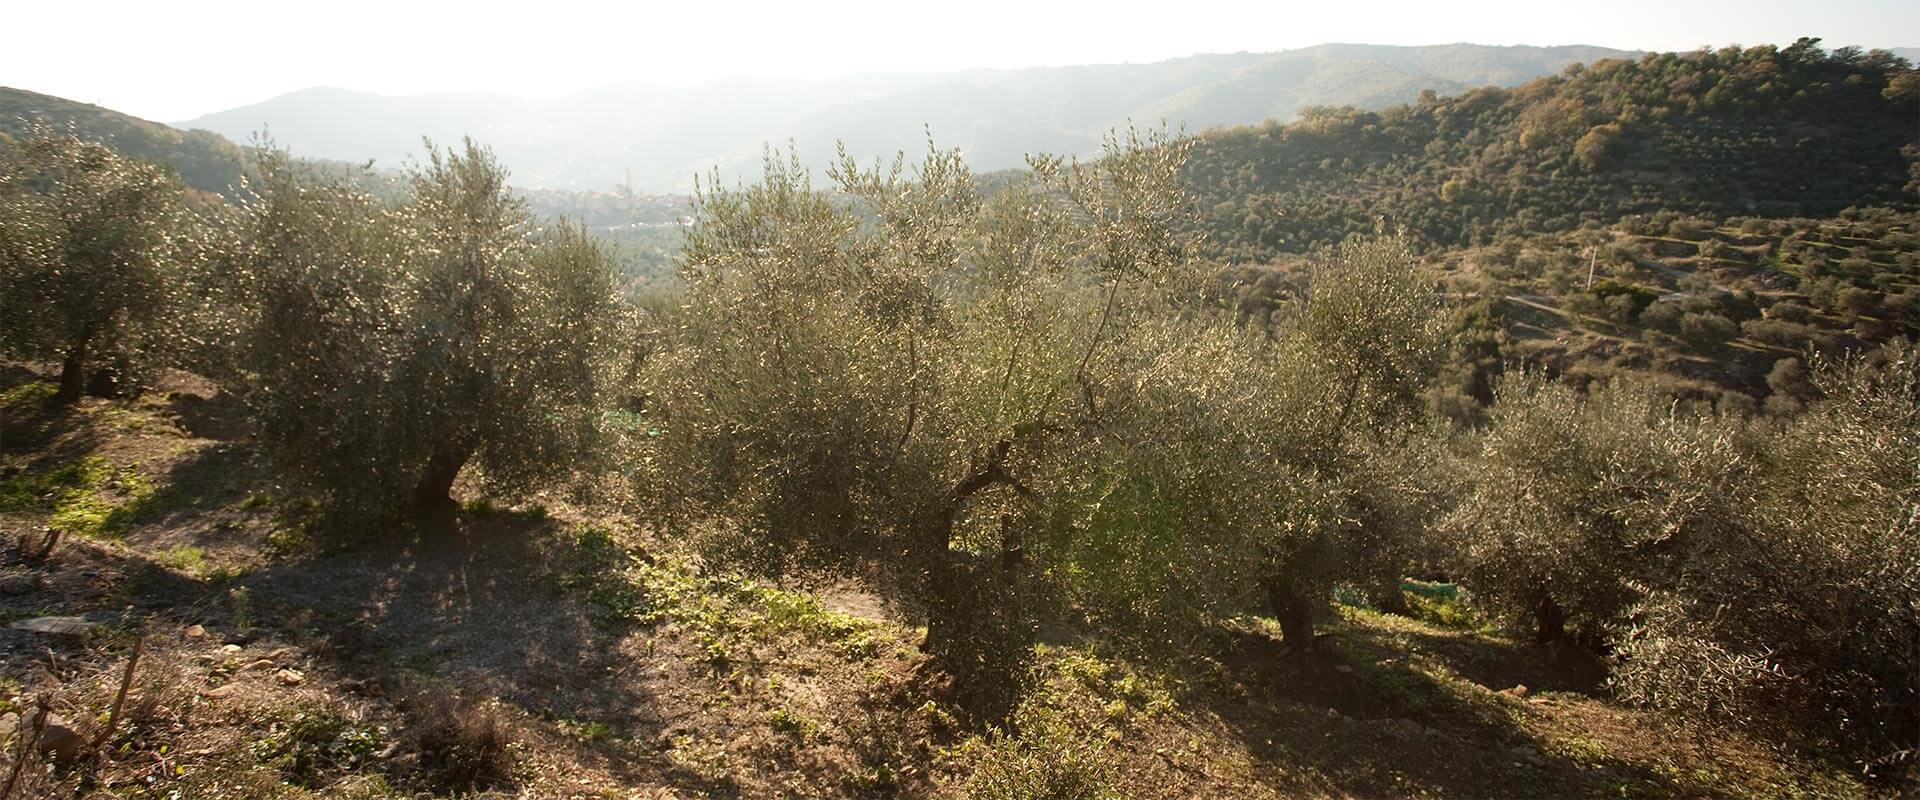 How to plant an olive tree – Fratelli Carli